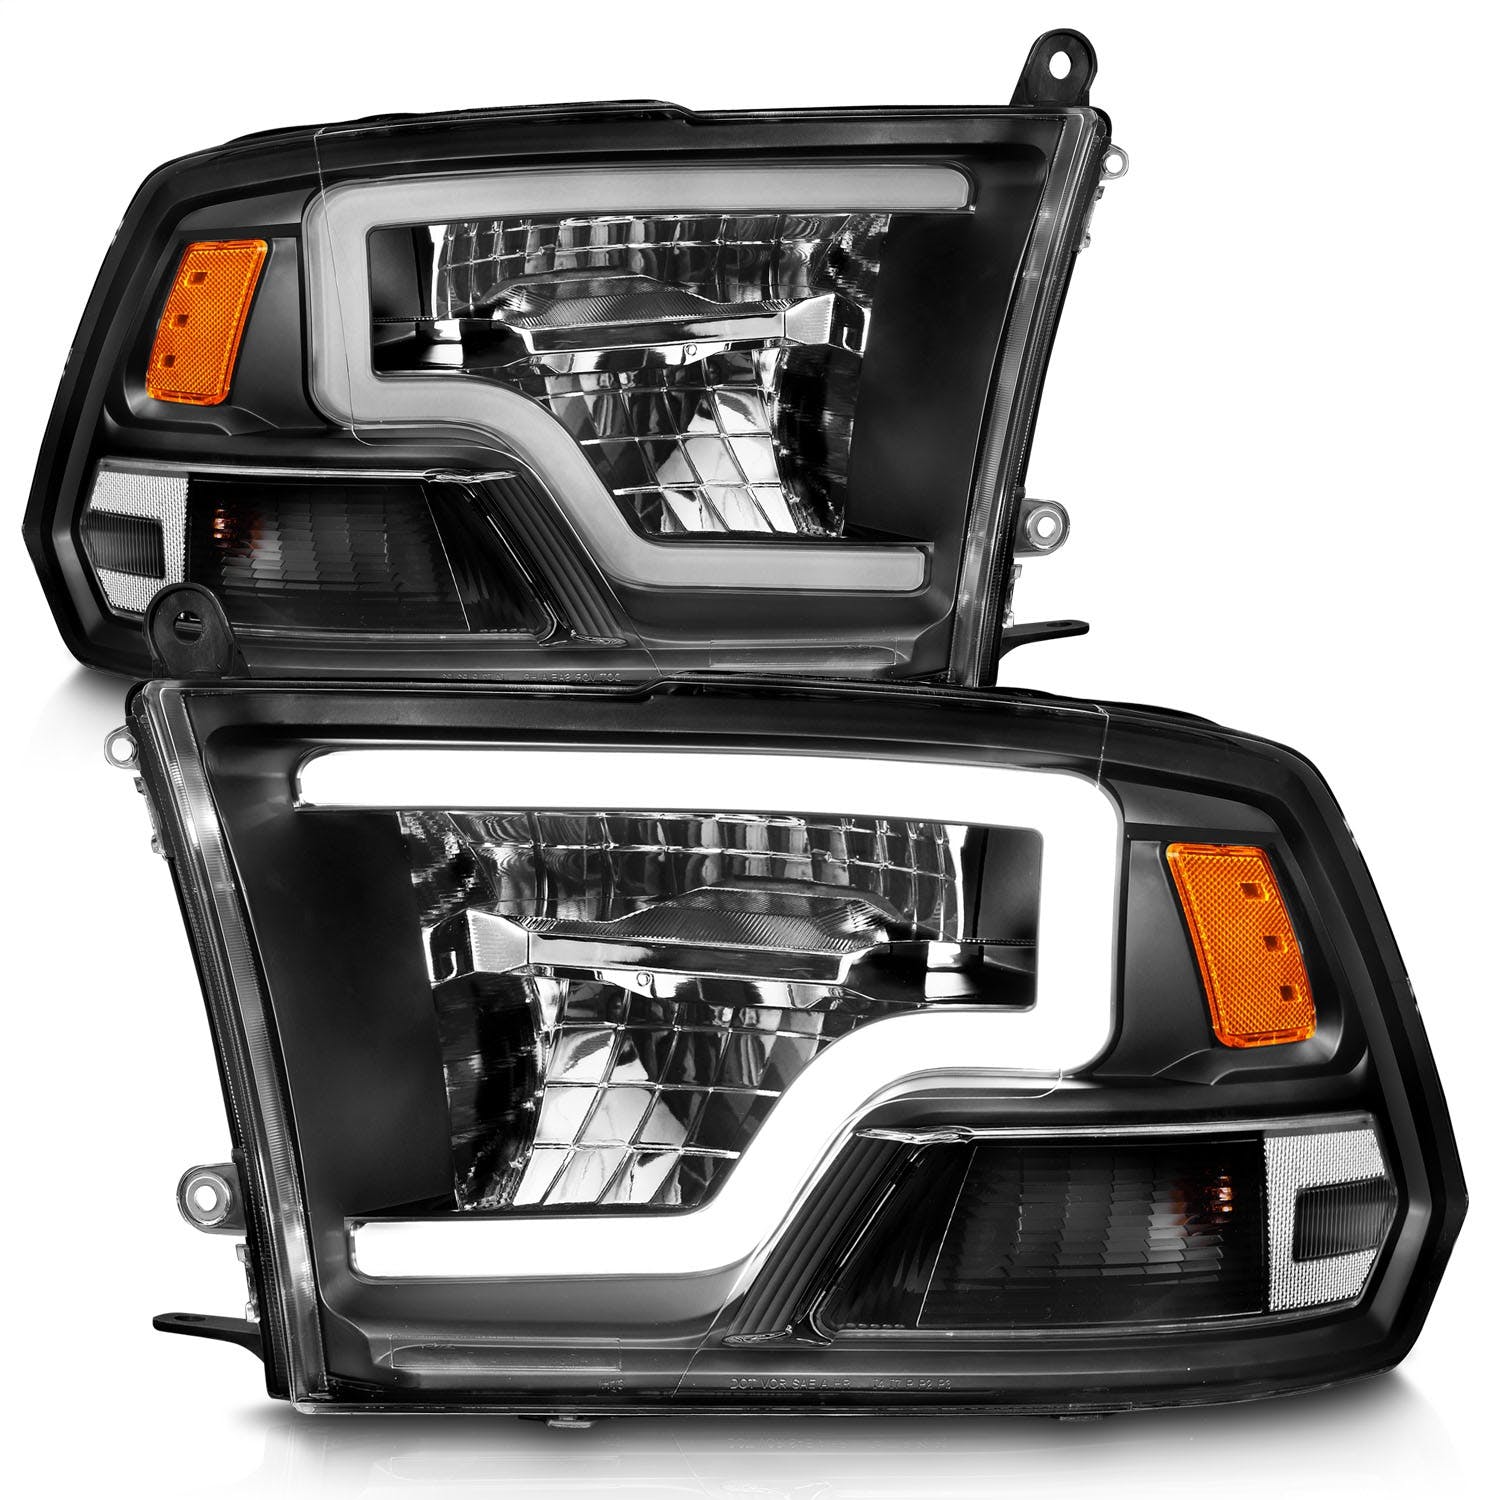 AnzoUSA 111539 Full LED Square Projector Headlights with Light Bar Chrome Housing